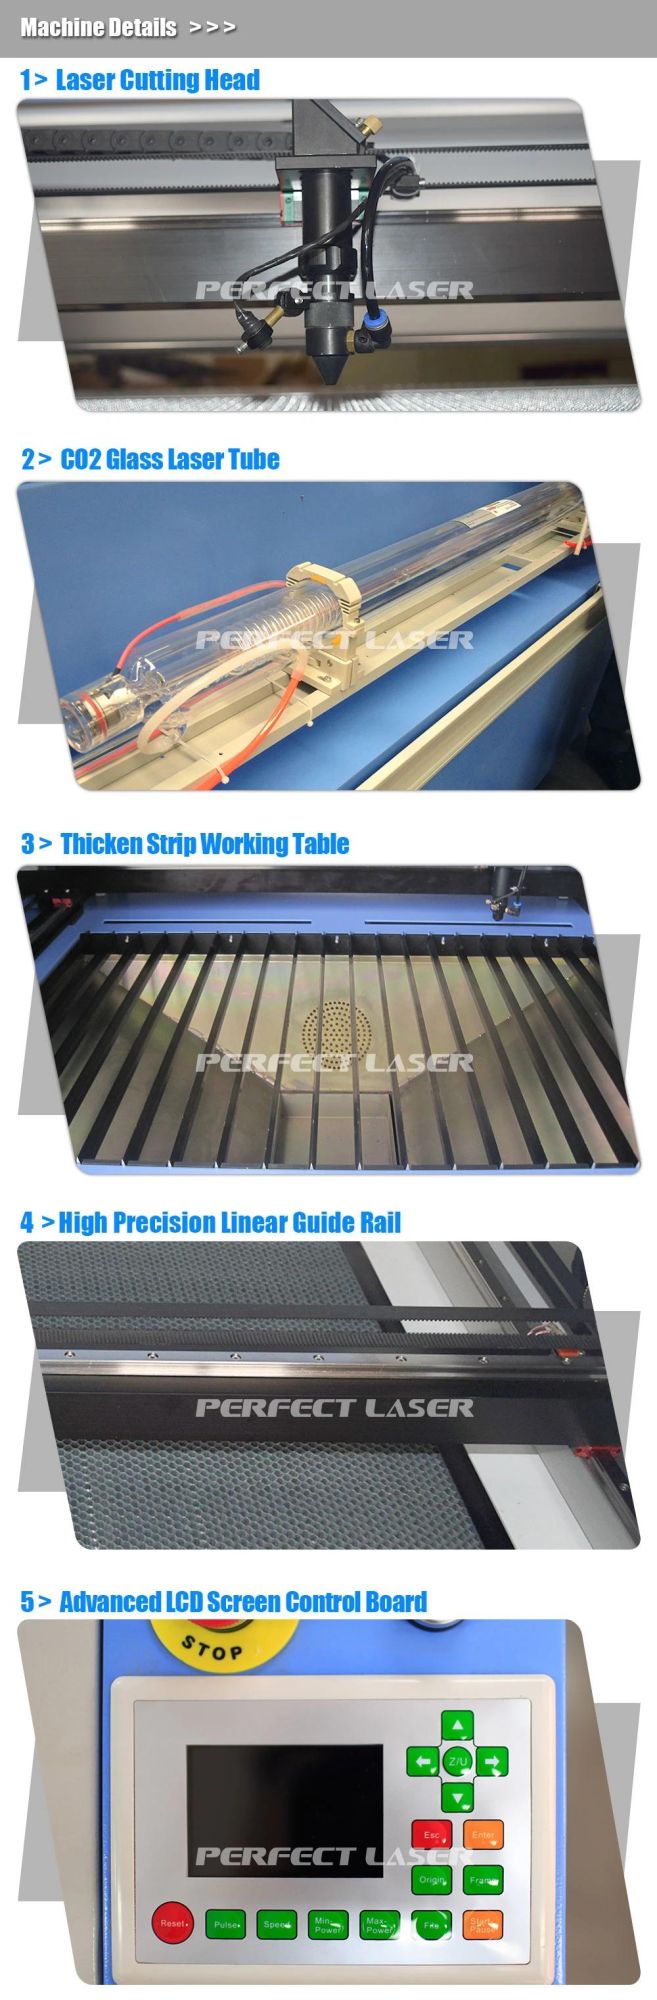 Hotsale 13090 Double Head CO2 Laser Engraving Cutting Machine Good Price